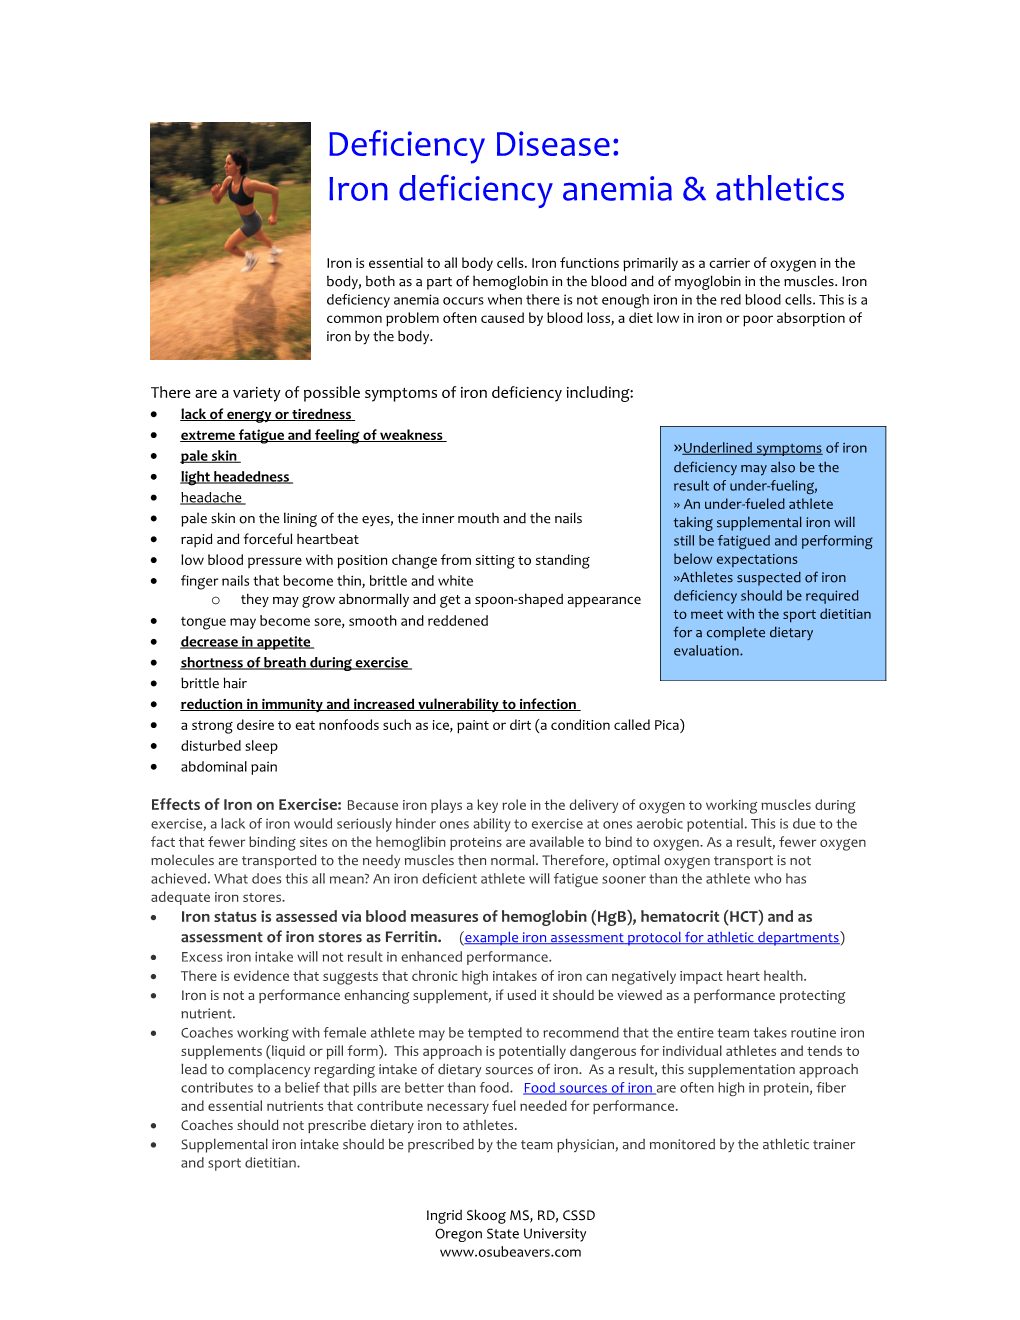 There Are a Variety of Possible Symptoms of Iron Deficiency Including